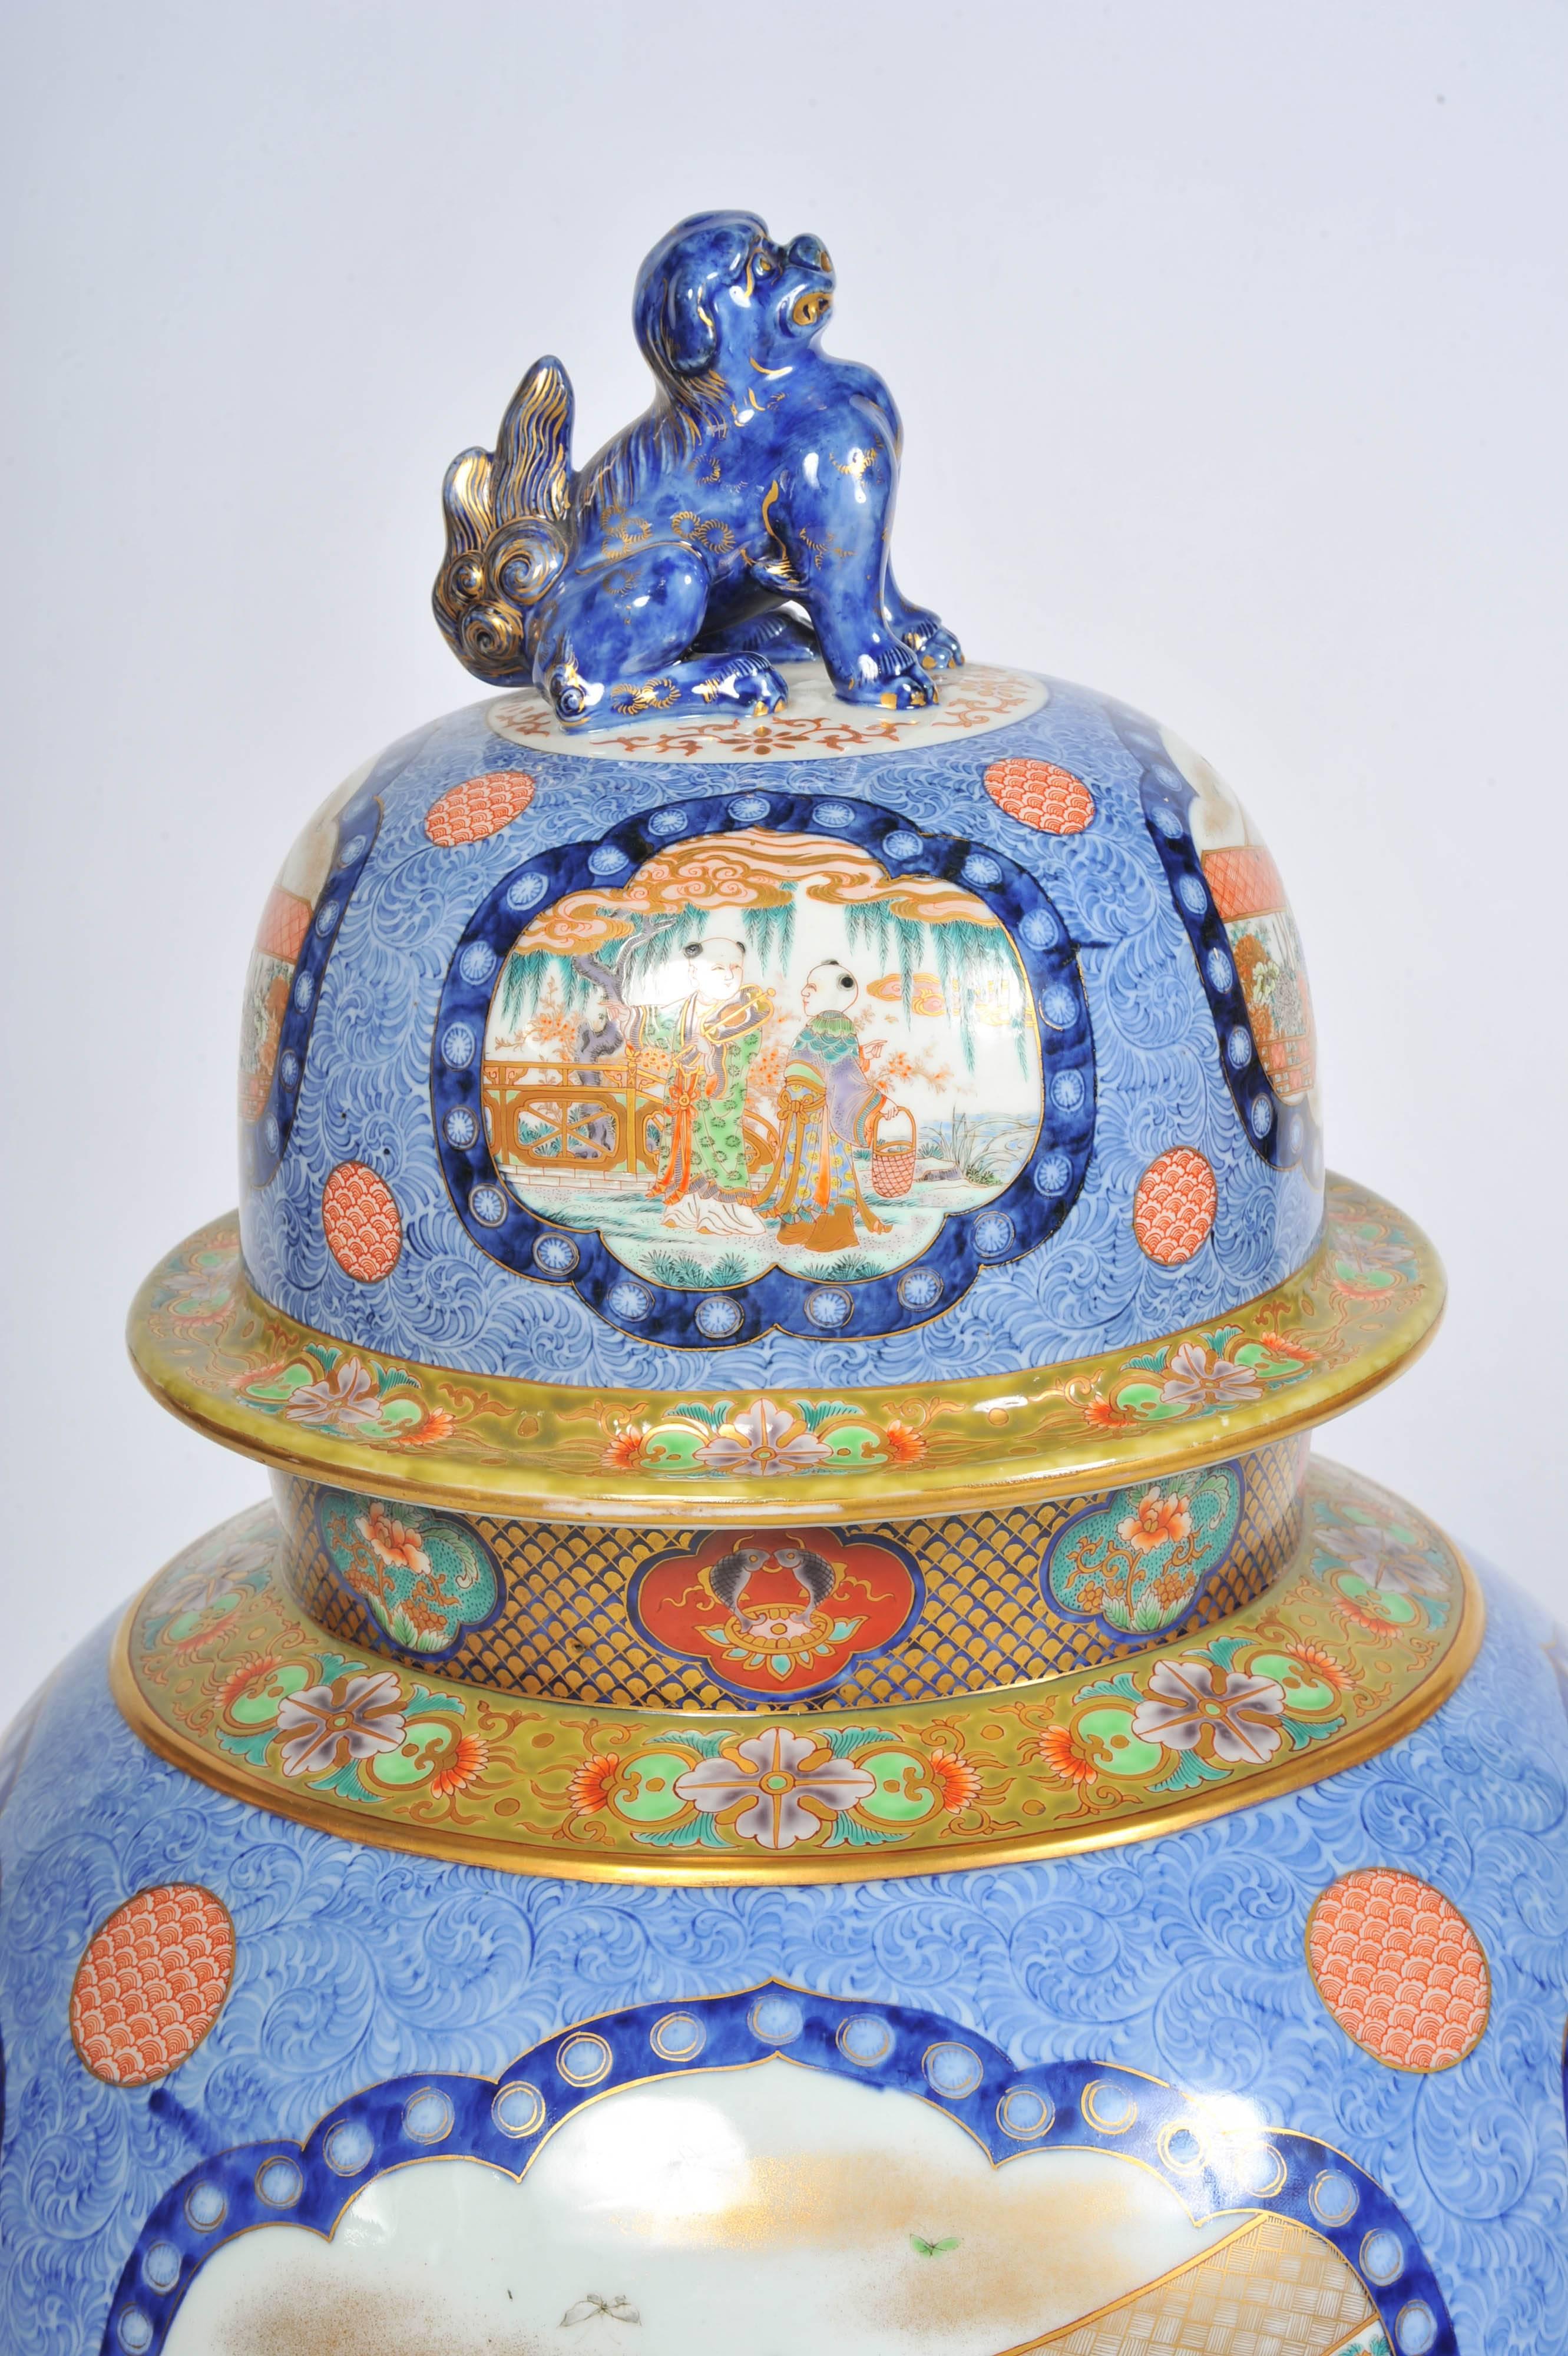 A very impressive 19th century Japanese Fukagawa Meiji period (1868-1912) lidded vase.
Having four panels depicting classical scenes to the lid and vase.